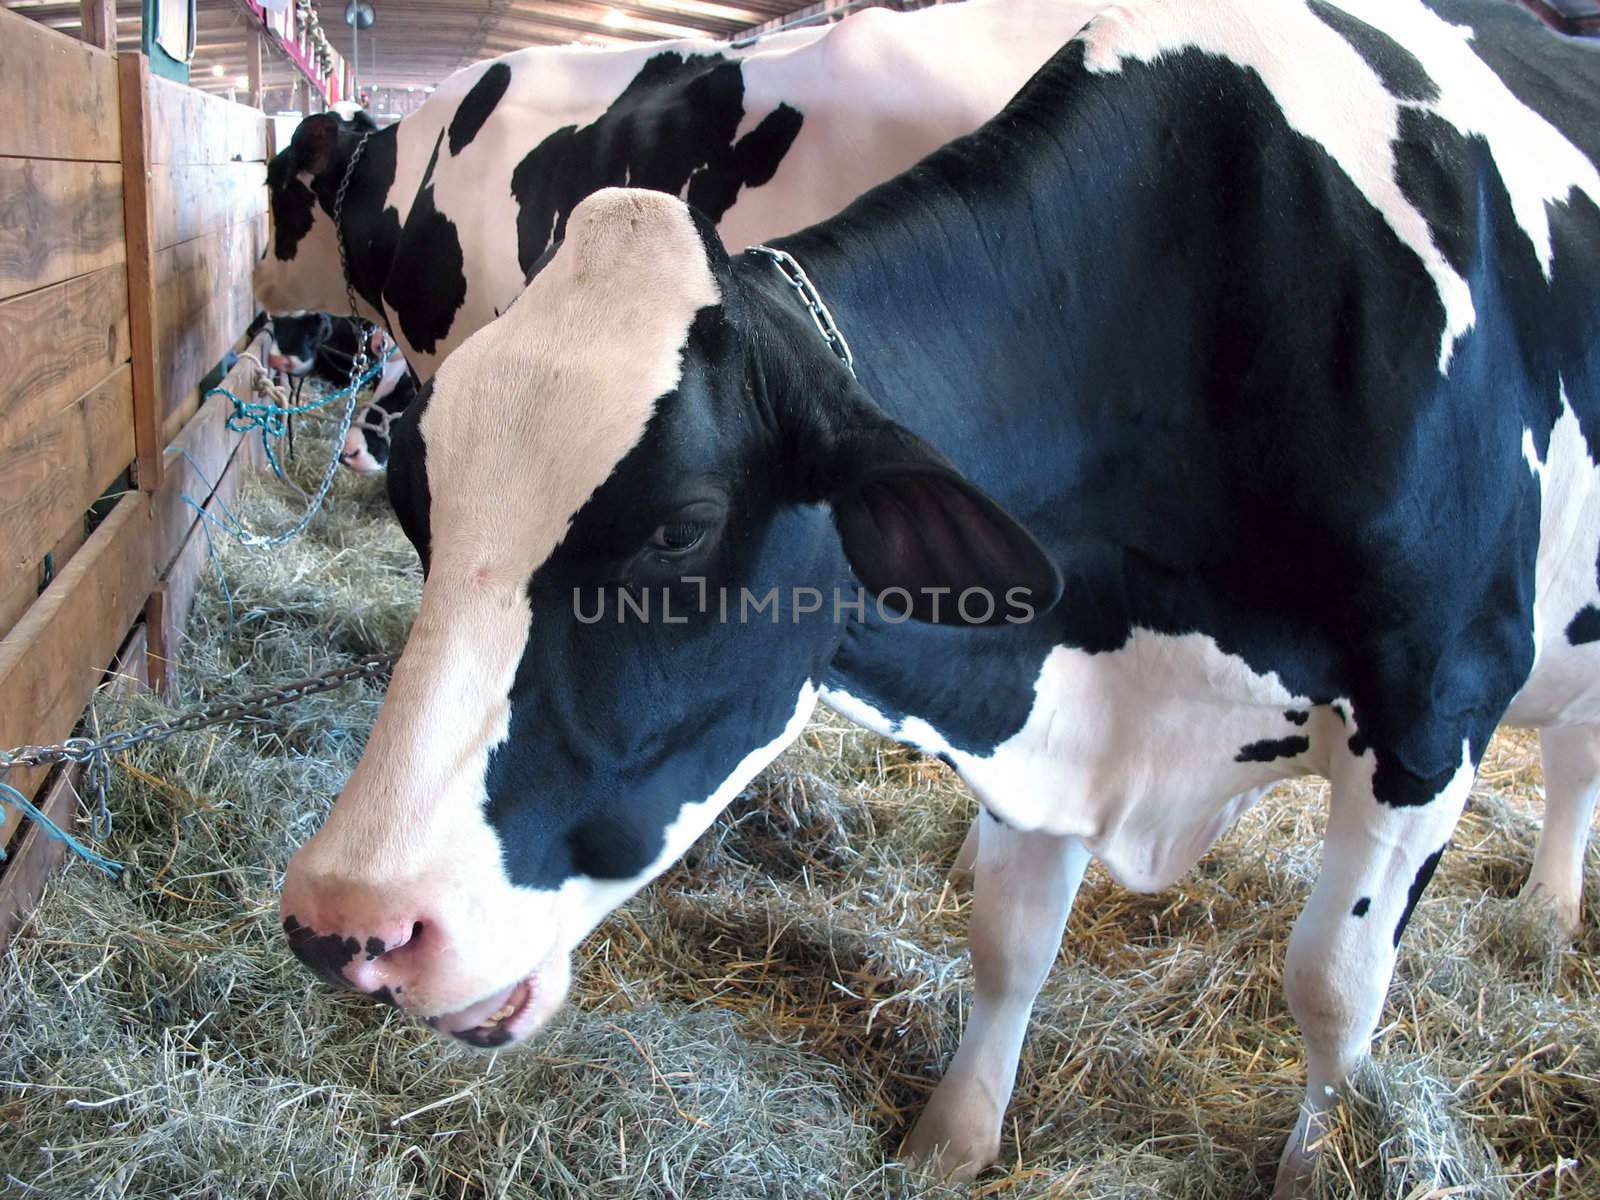 A closeup of a dairy cow eating hay in the barn - chewing his cud.